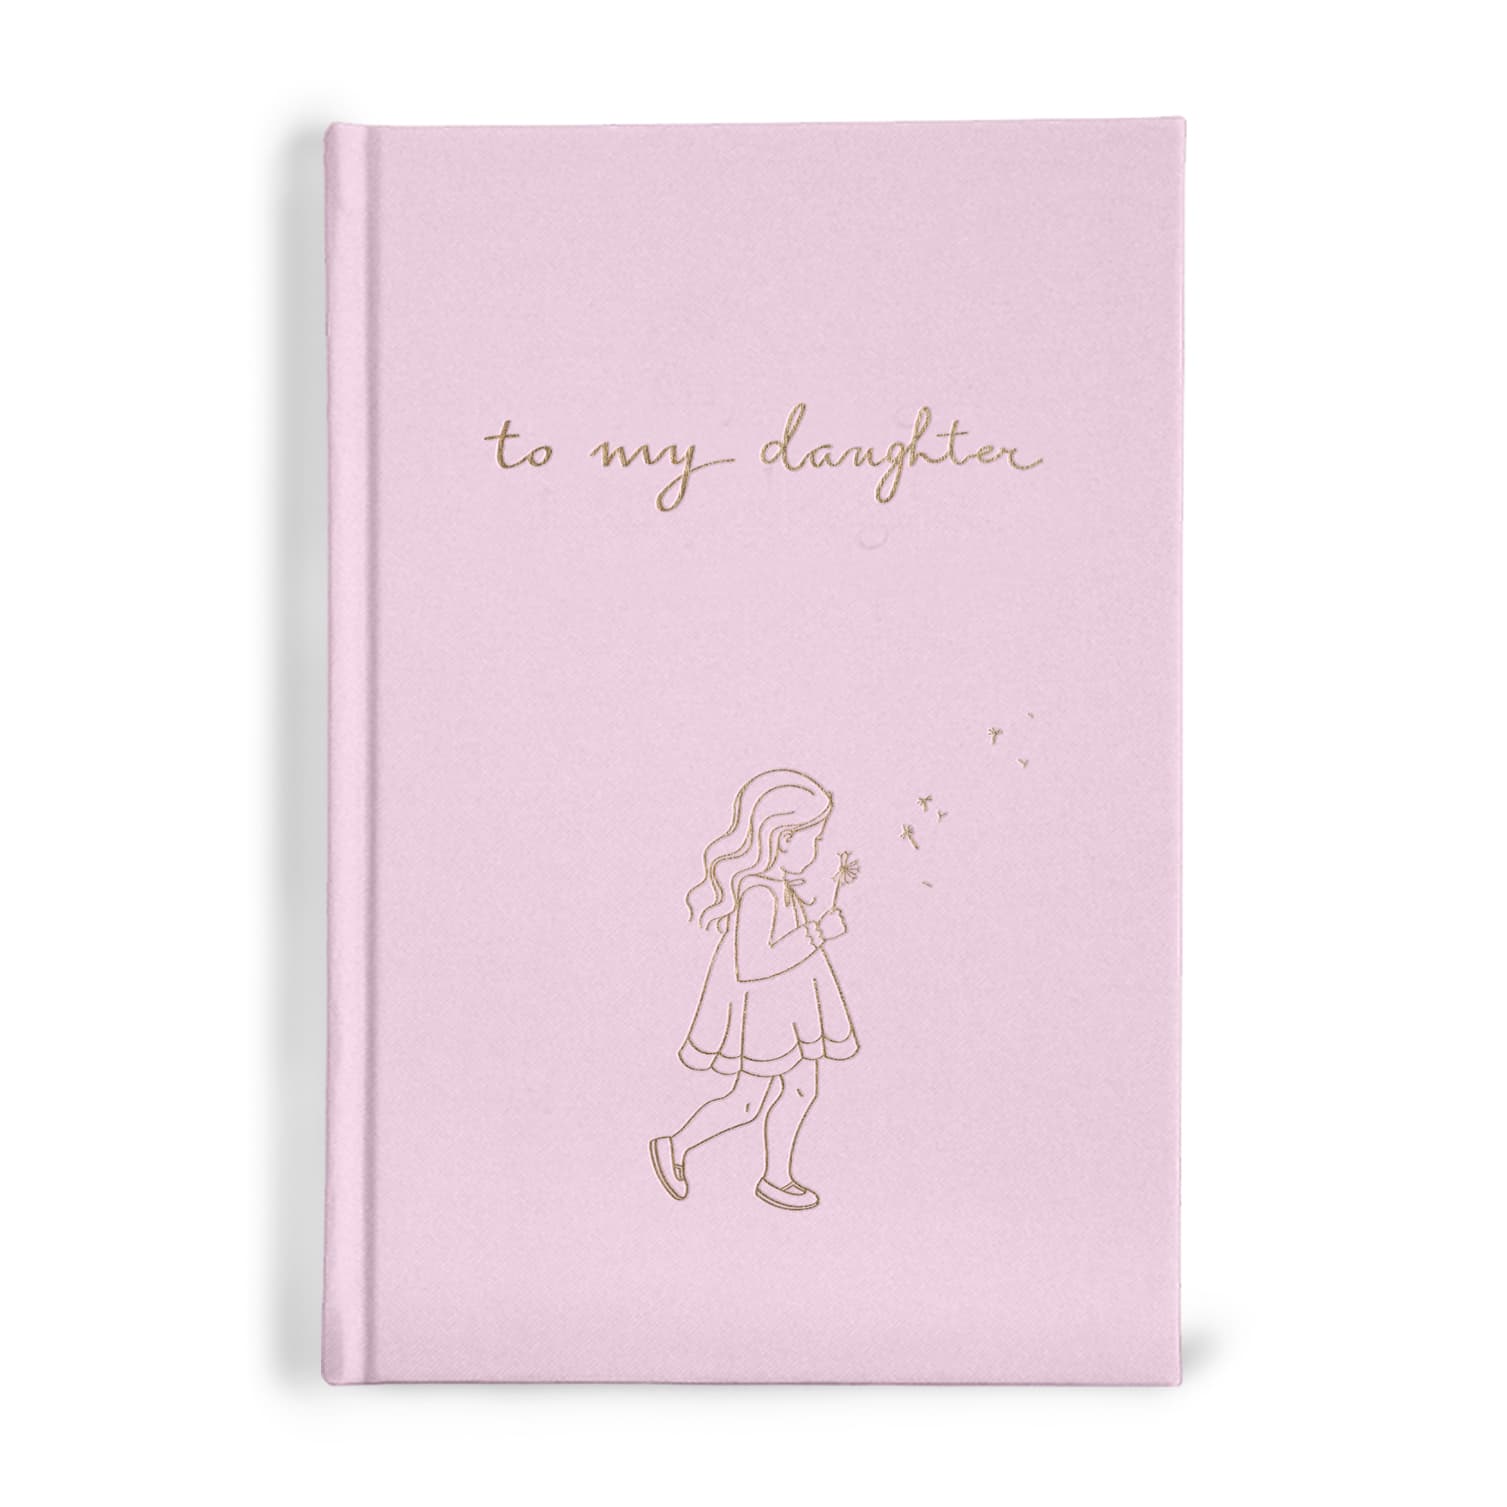 Forget Me Not Childrens Books To My Daughter - Baby Journal & Record Book (Illustrated Cover)